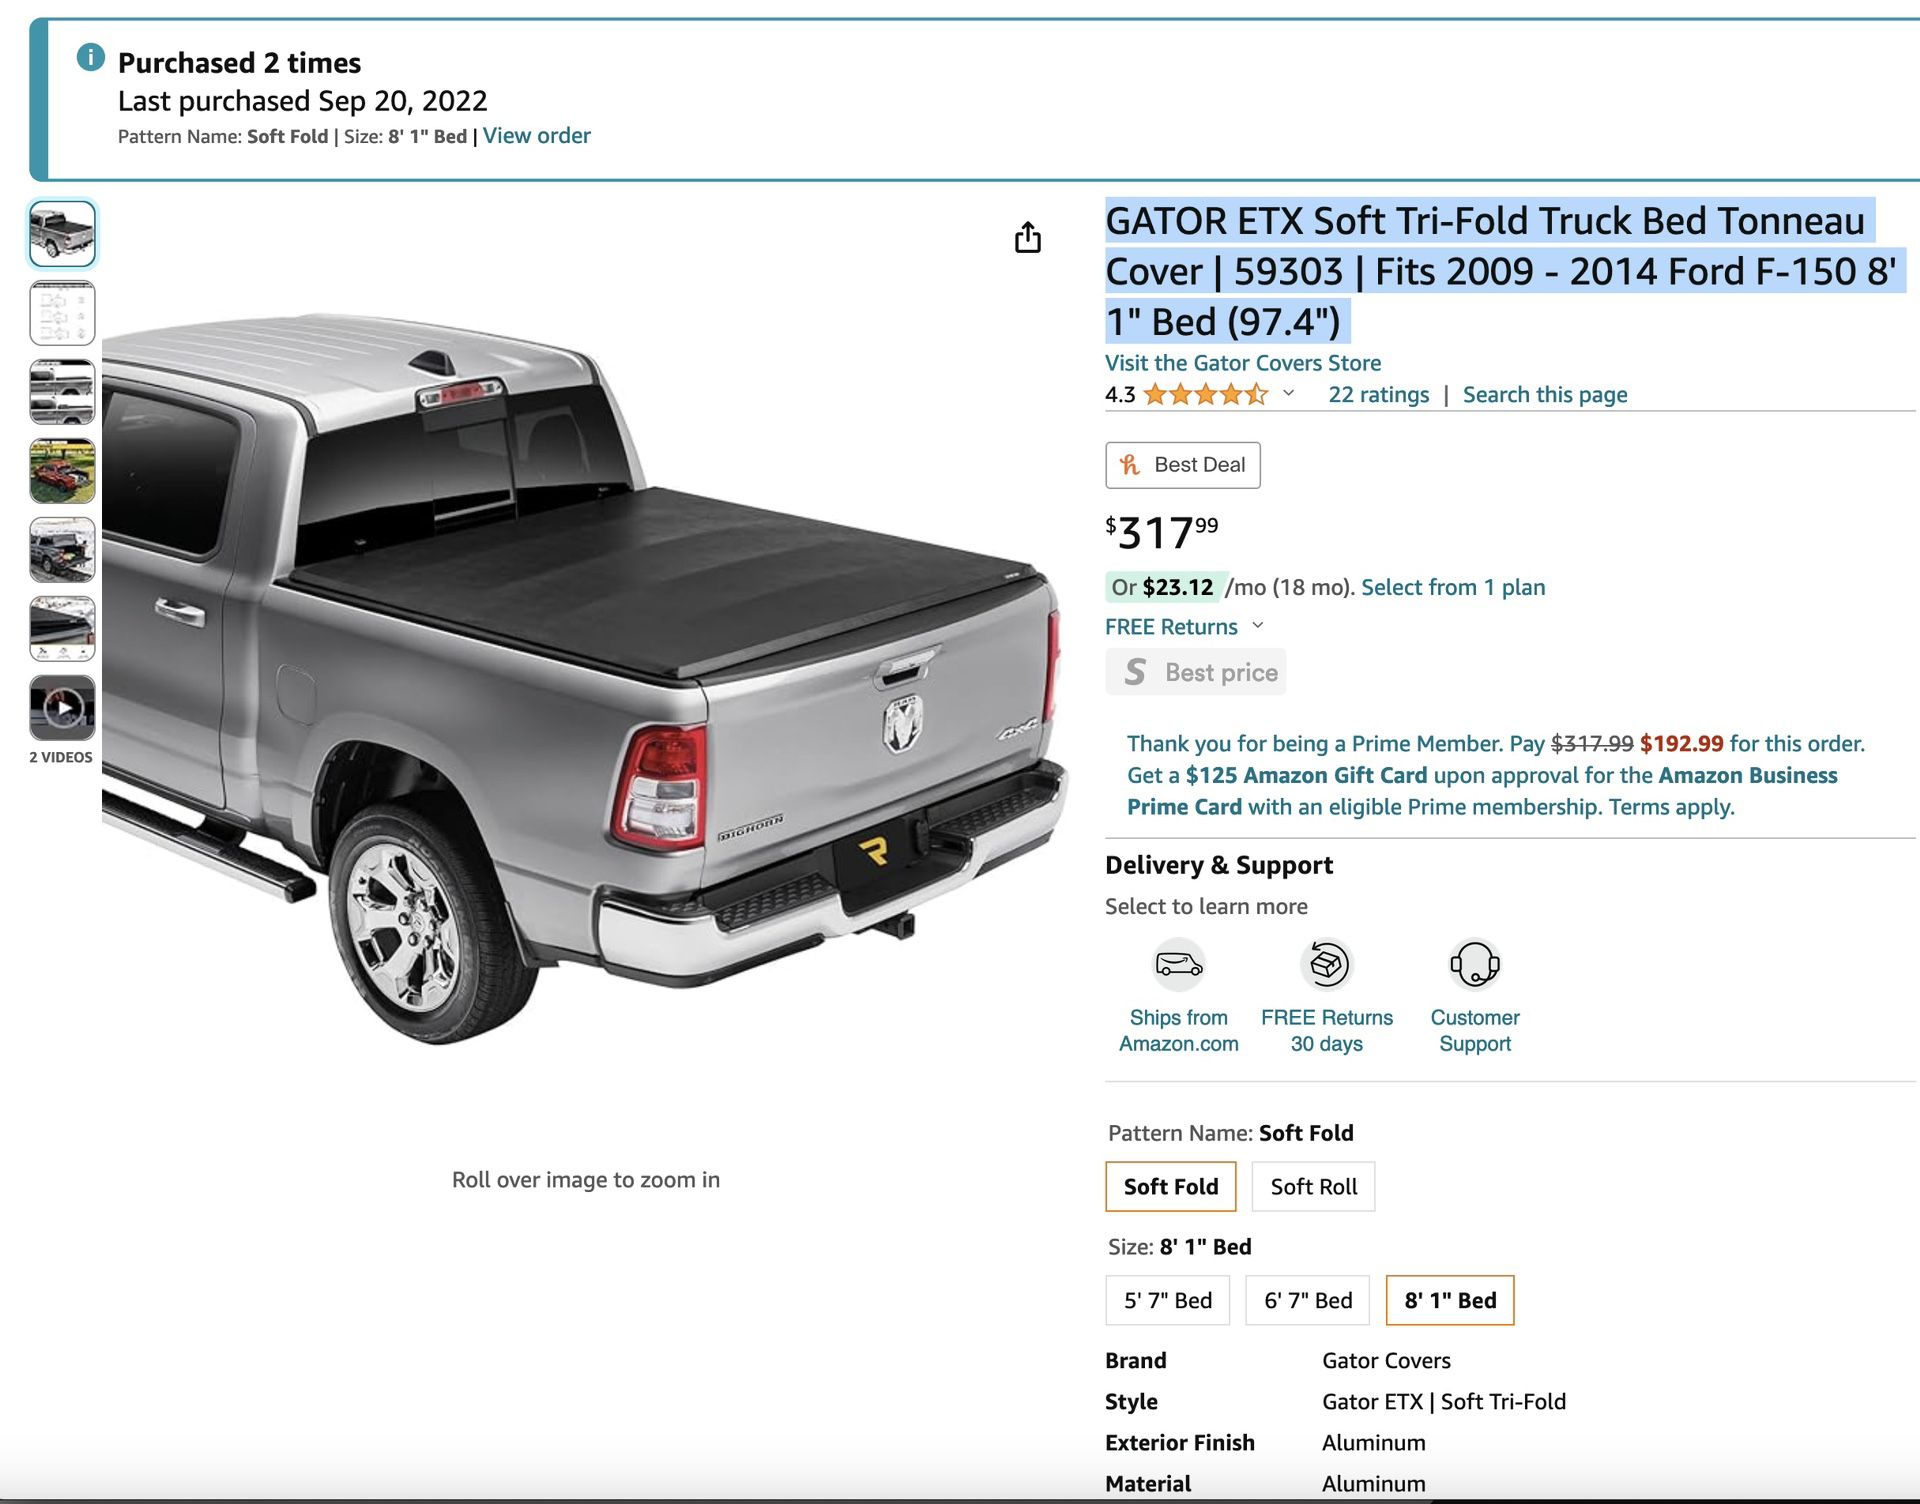 Used Gator Ford F-150 Truck Bed Tonneau Cover Fits 2009-2014 8ft Bed